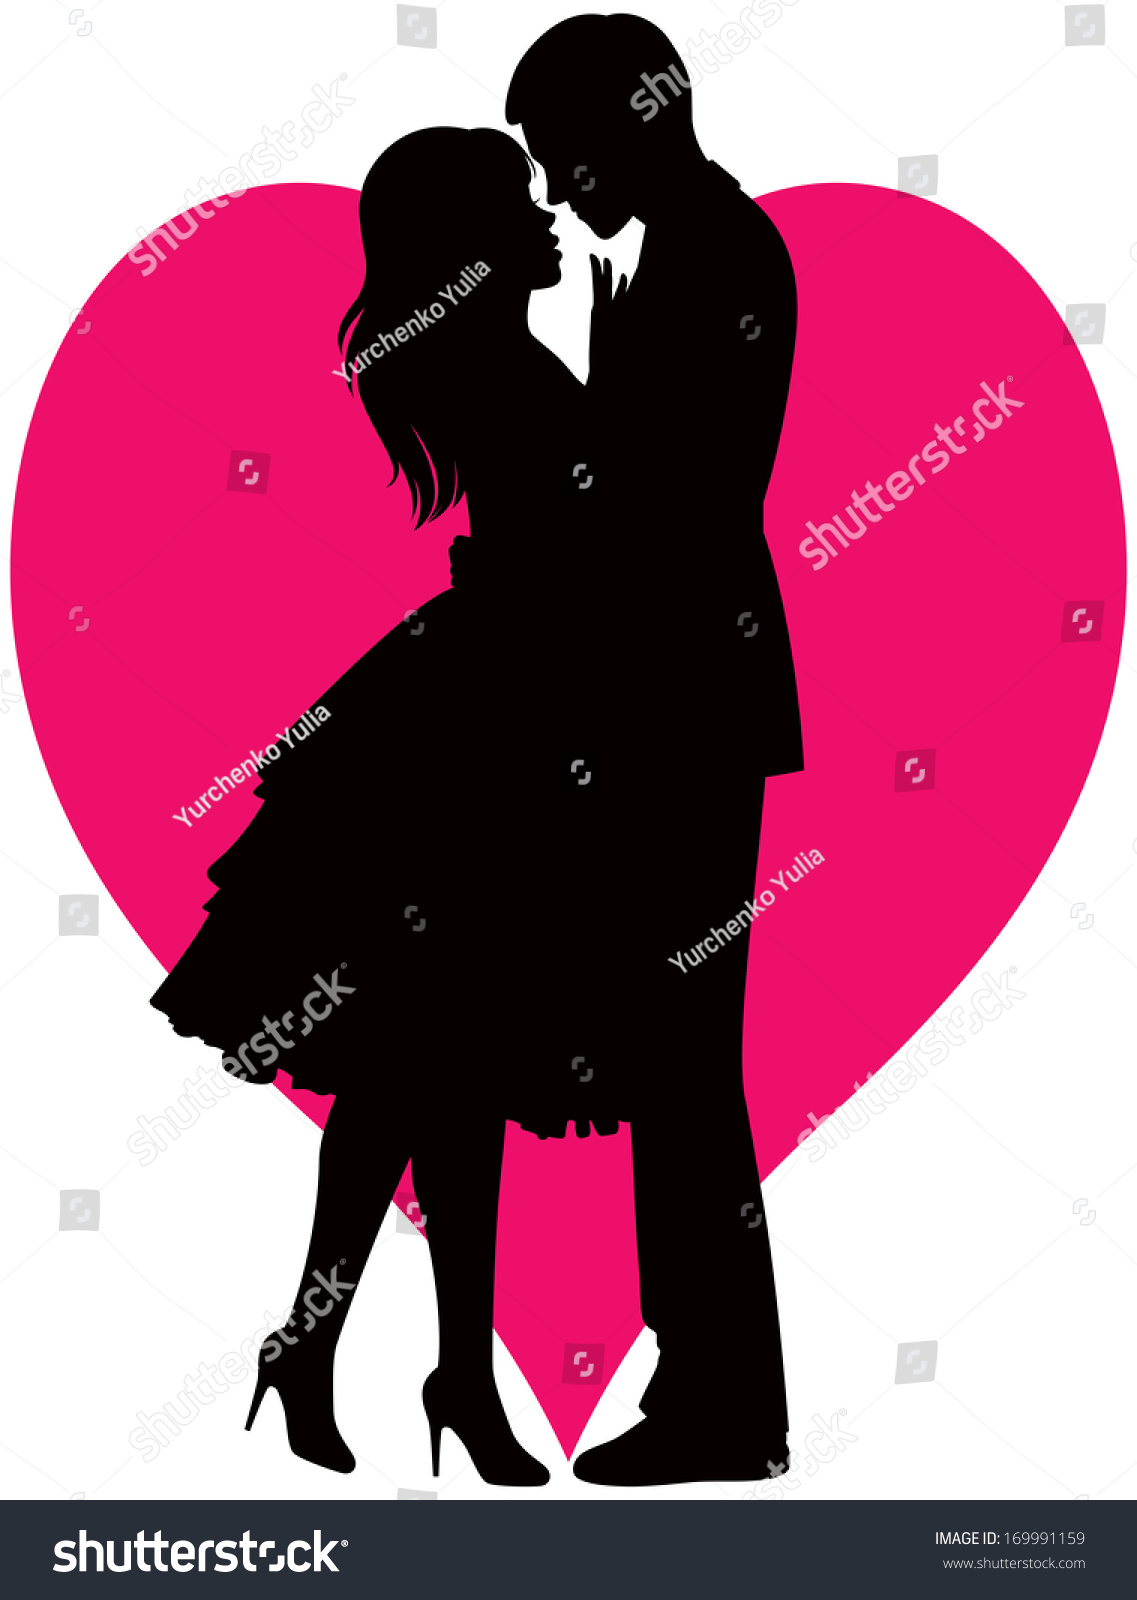 Illustration Black Silhouette Of Lovers Embracing On A White Background